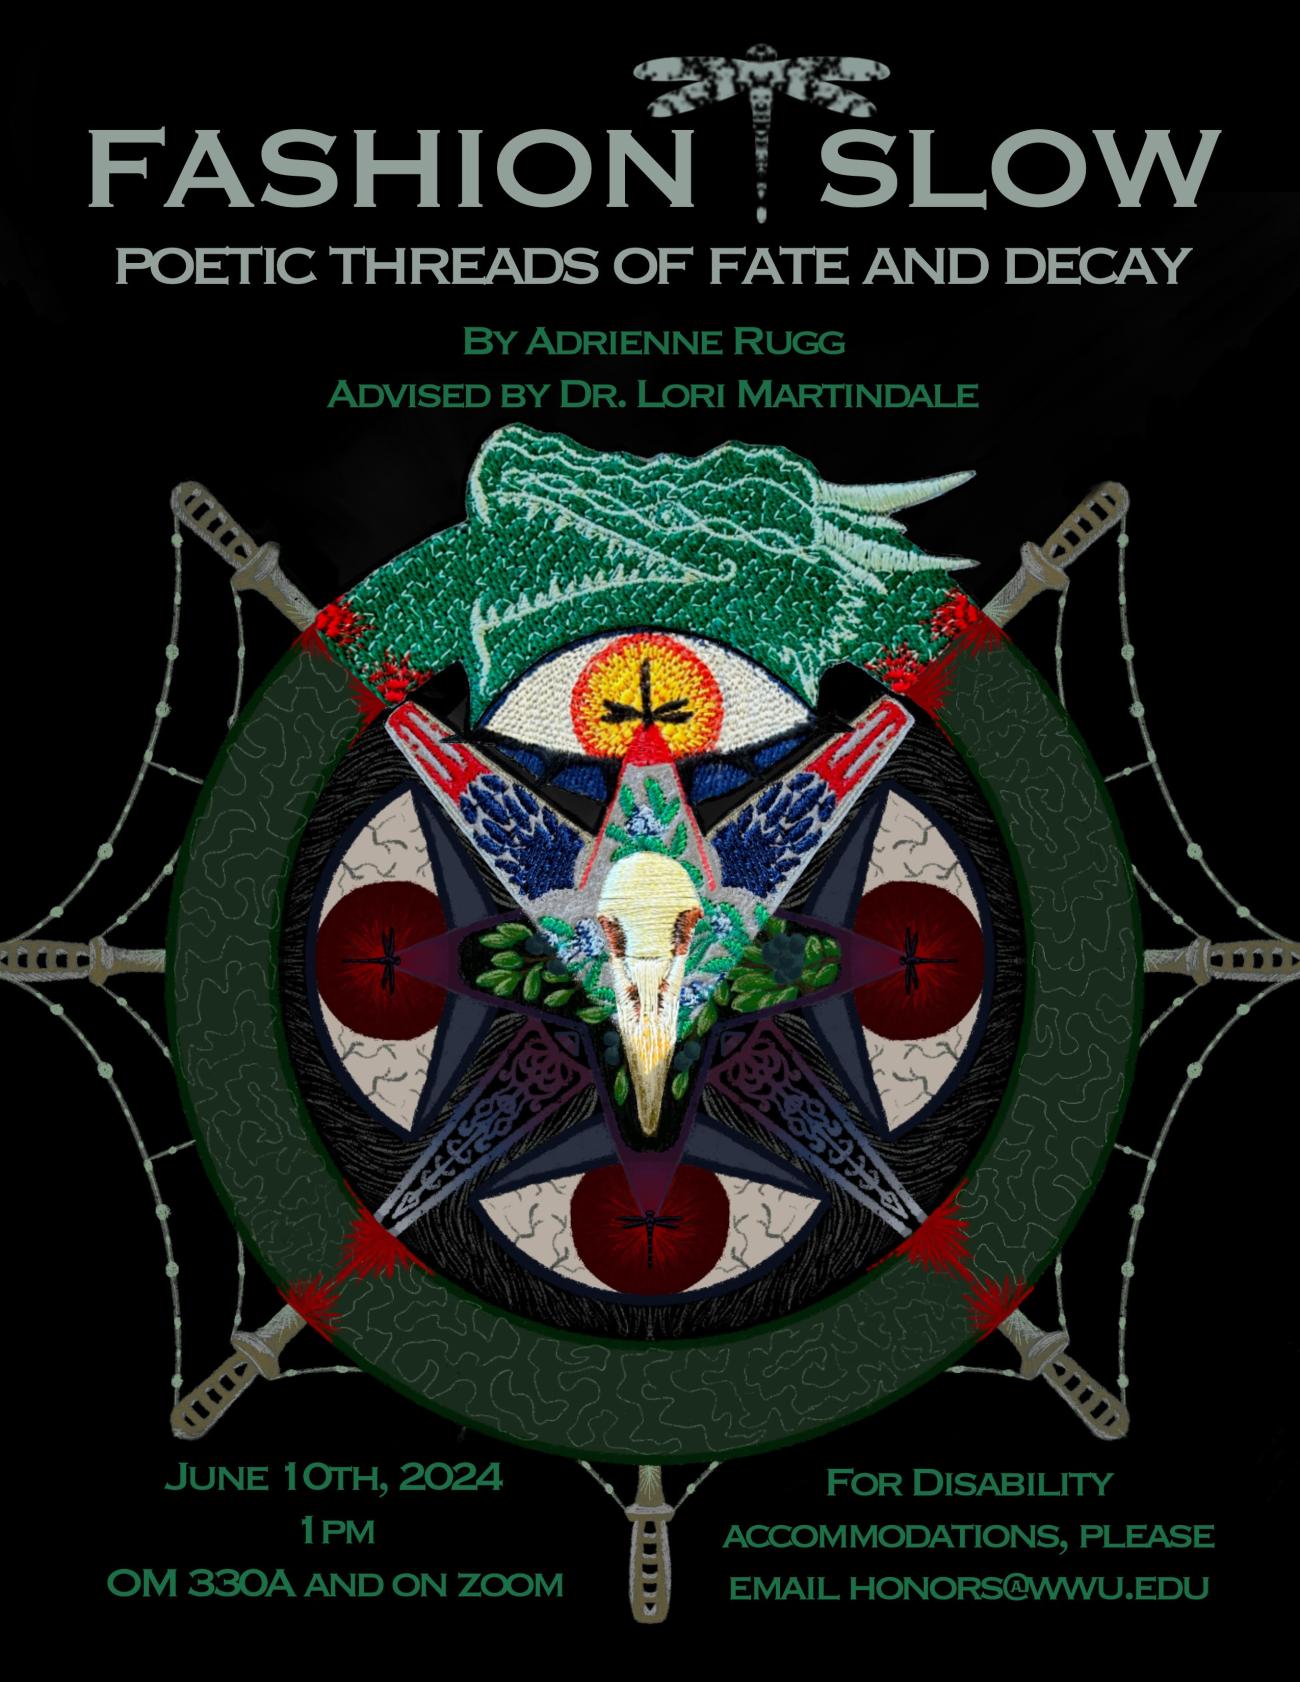 A black poster with a circular design of a green dragon swallowing its tail and glowing eyes in each quadrant of the circle. In the center are green leaves and a raven skull. The lower three quadrants are digitally rendered, but the upper quadrant is embroidered with shiny thread. The text reads “Fashion Slow: Poetic Threads of Fate and Decay. By Adrienne Rugg. Advised by Dr. Lori Martindale. June 10th, 2024. 1pm. OM 330A and on Zoom. For disability accommodations, please email honors@wwu.edu”